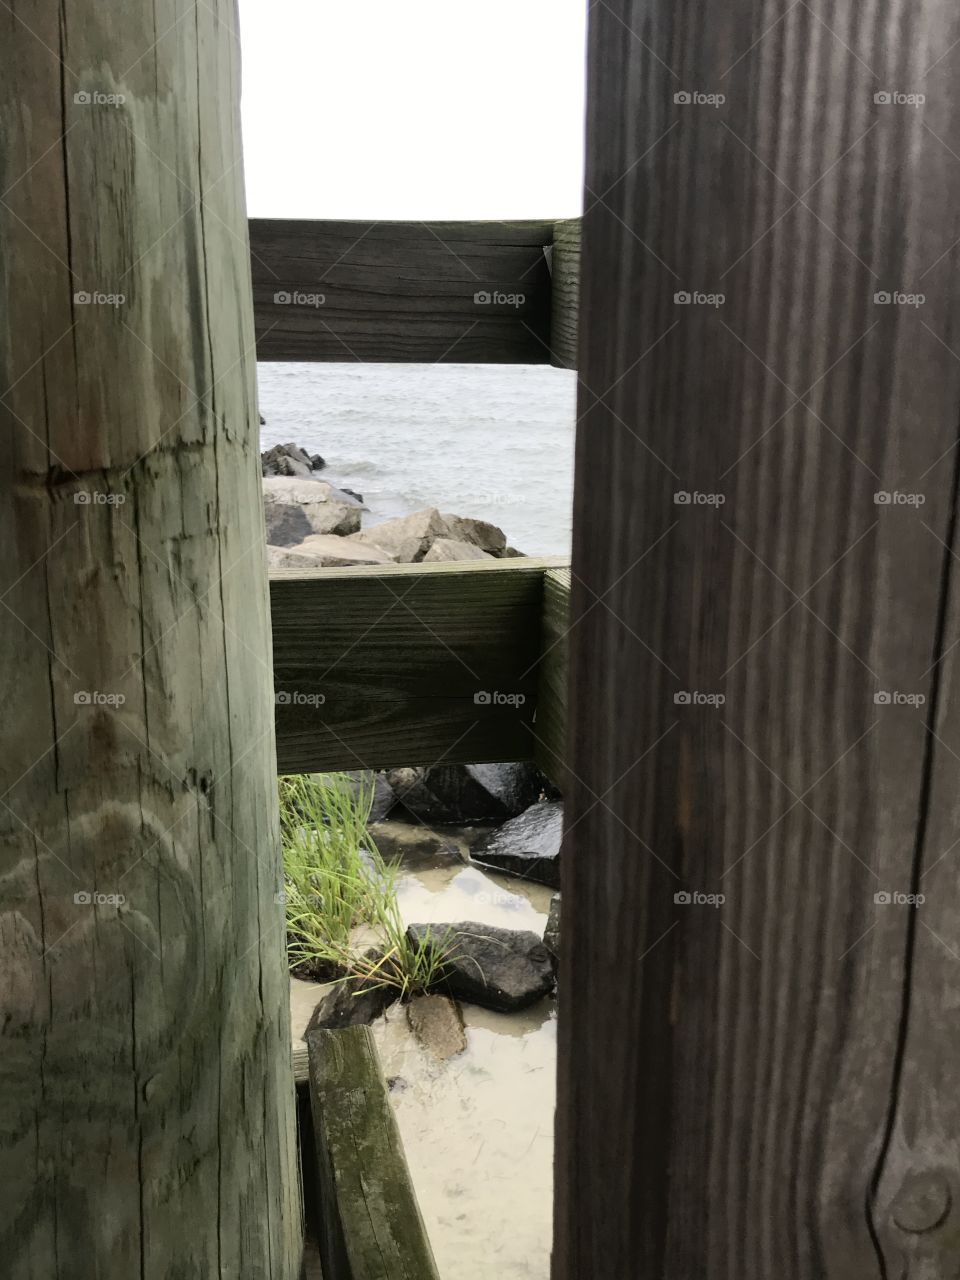 Looking through the pier.